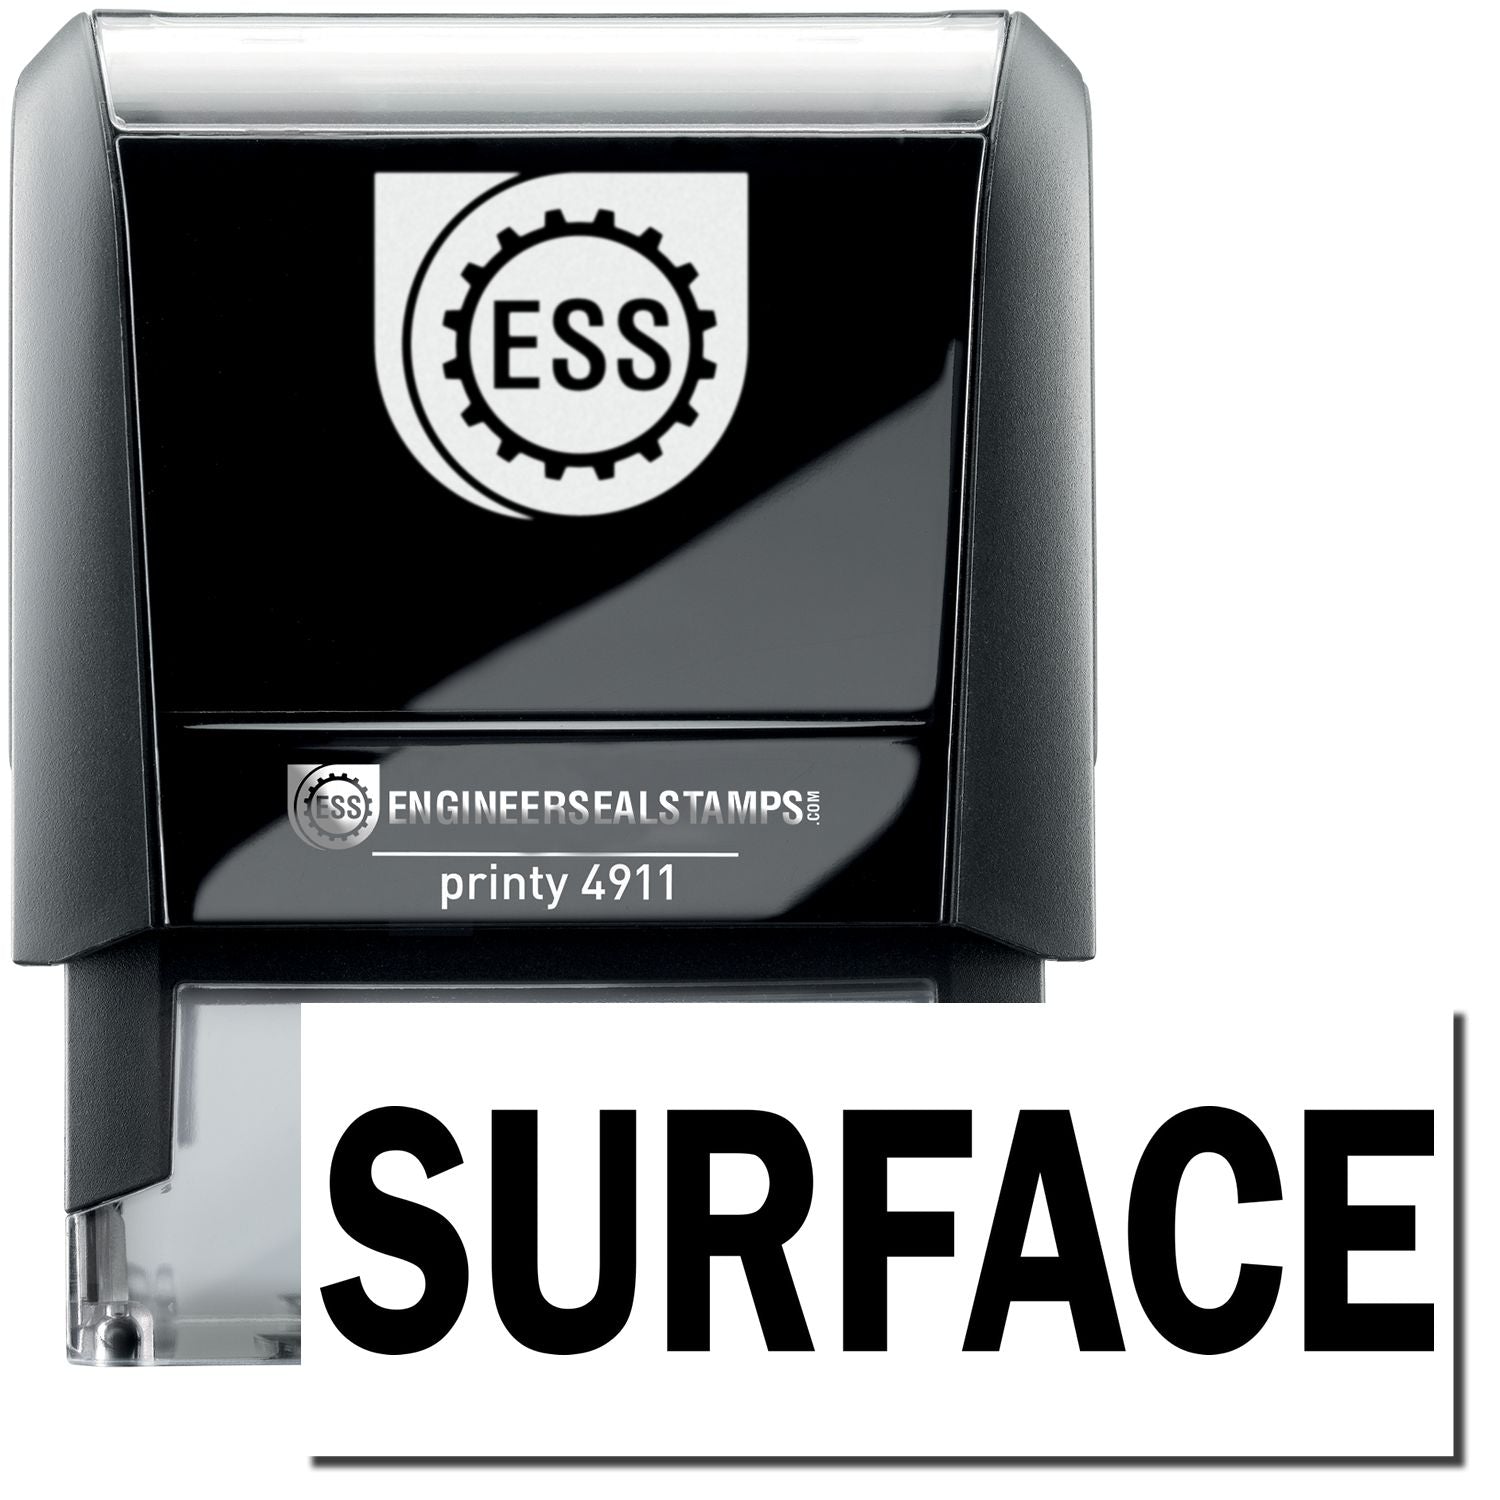 A self-inking stamp with a stamped image showing how the text "SURFACE" is displayed after stamping.